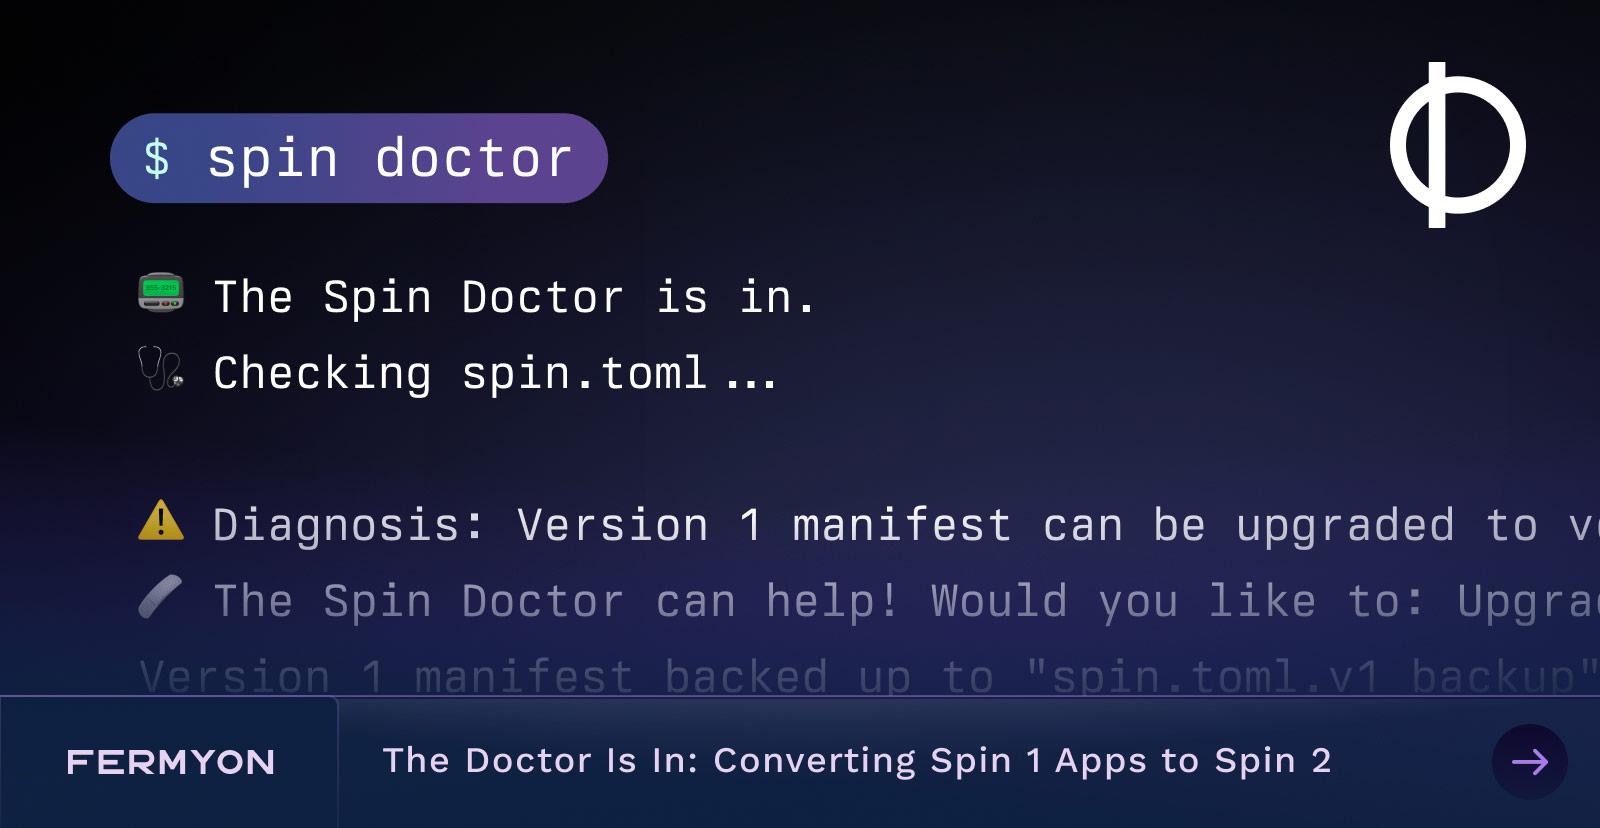 The Doctor Is In: Converting Spin 1 Apps to Spin 2